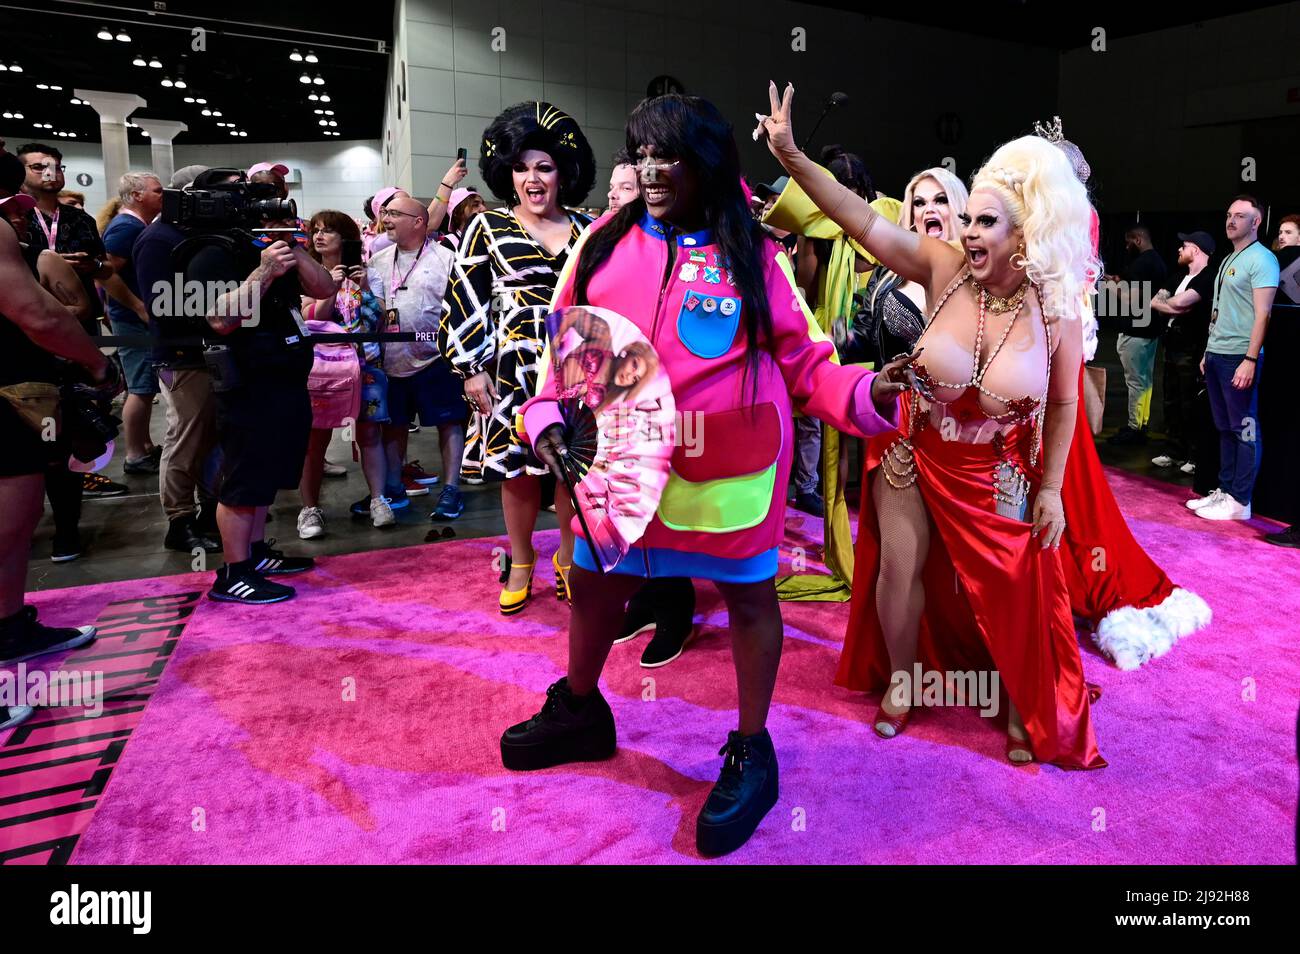 Widow VonÕDu (C) and Jaymes Mansfield  (R) pose at the 2022 Rupaul DragCon, Day 1, held at the LA Convention Center in Los Angeles, California, Friday, May 13, 2022.  Photo by Jennifer Graylock-Graylock.com 917-519-7666 Stock Photo